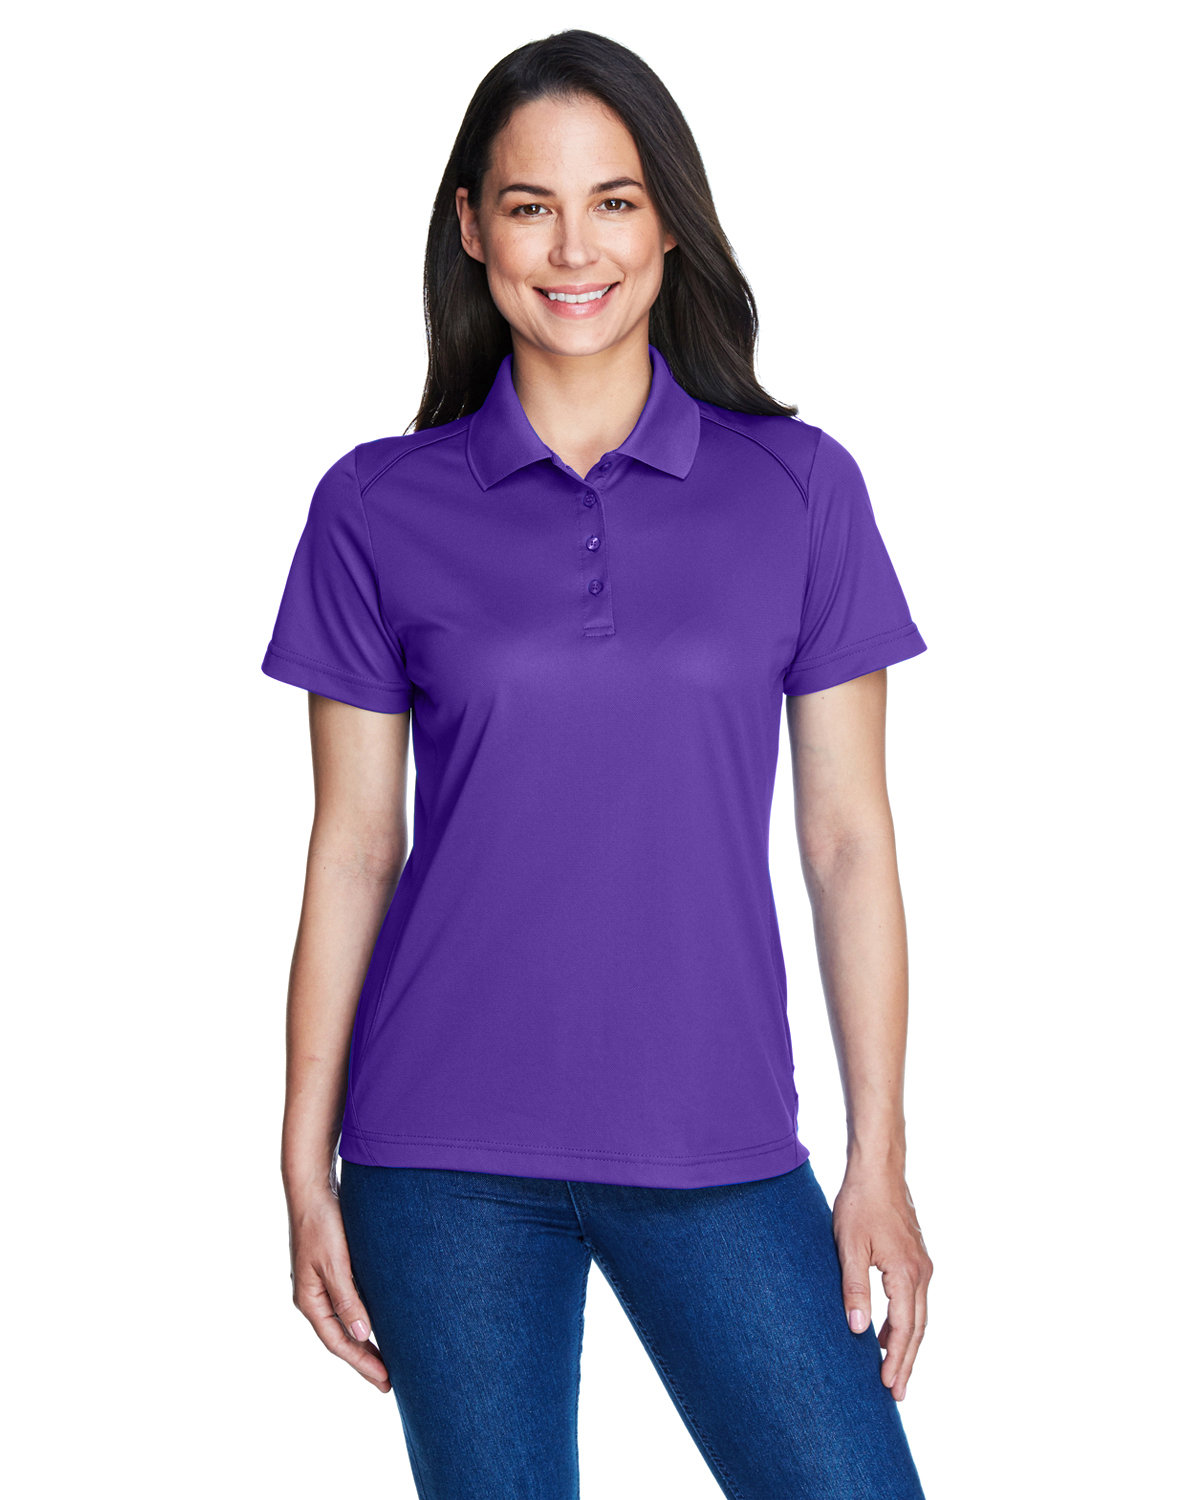 Extreme Ladies' Eperformance™ Shield Snag Protection Short-Sleeve Polo CAMPUS PURPLE 